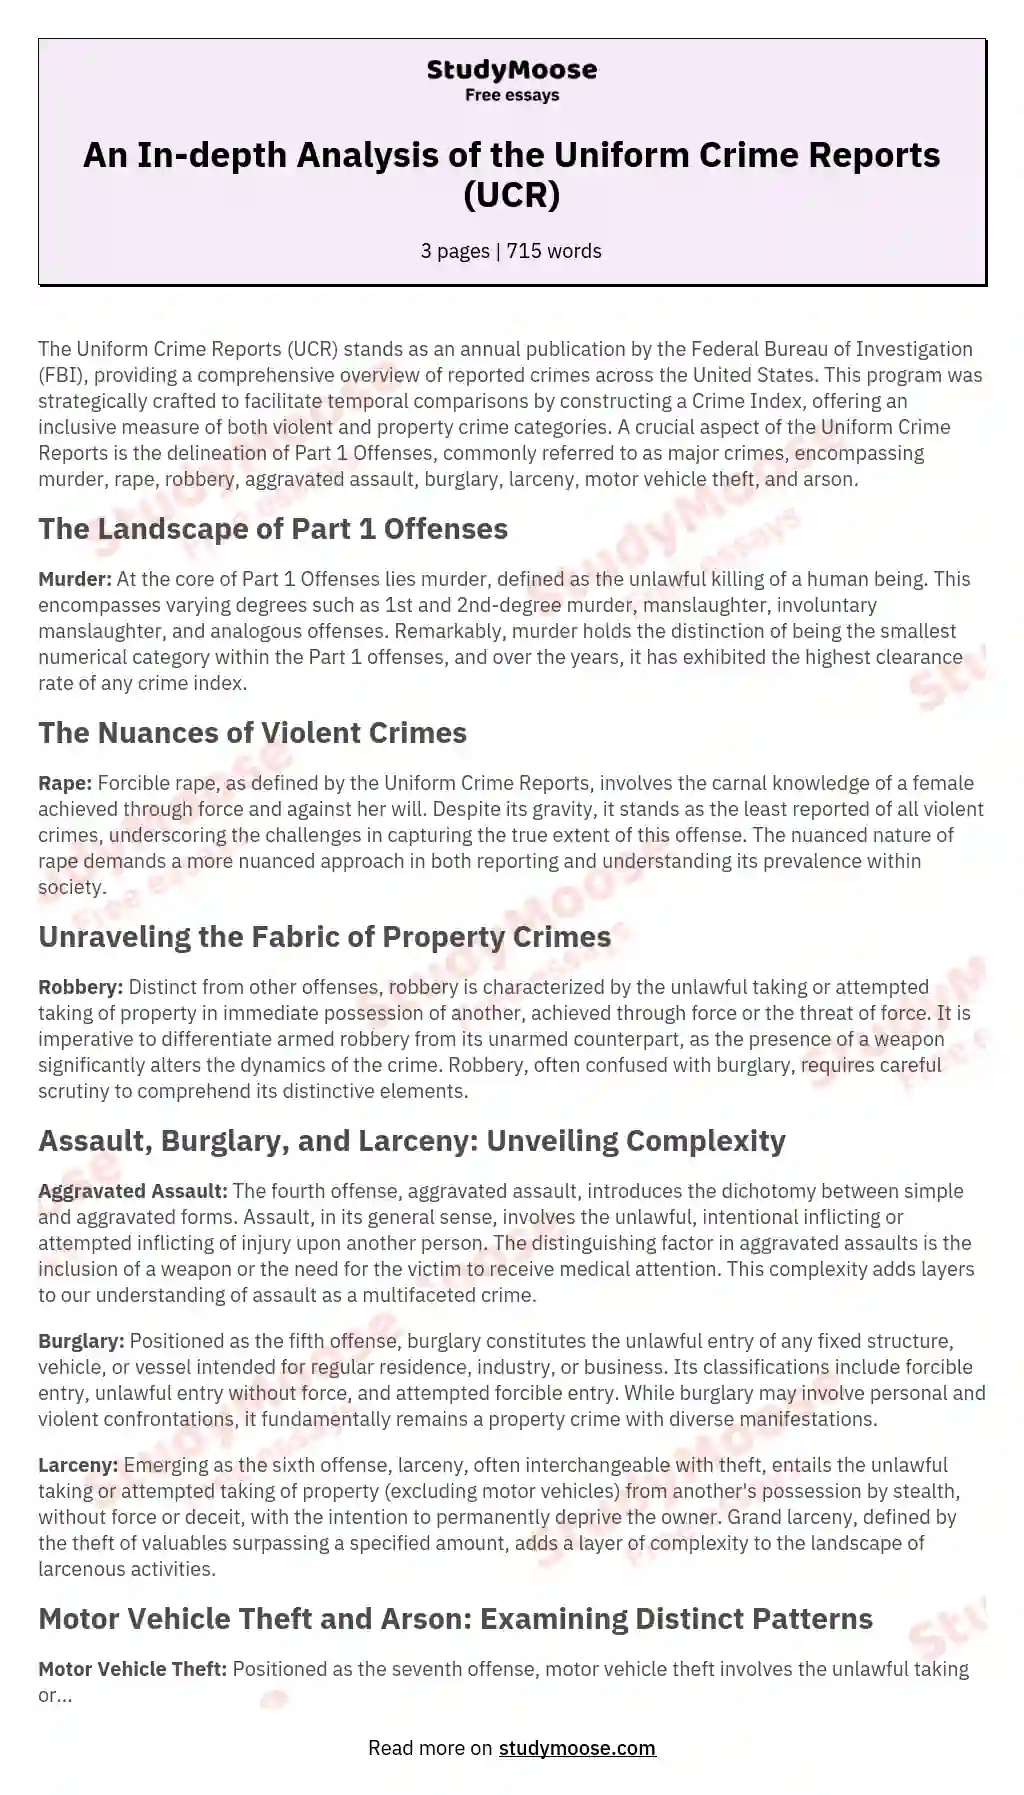 An In-depth Analysis of the Uniform Crime Reports (UCR) essay